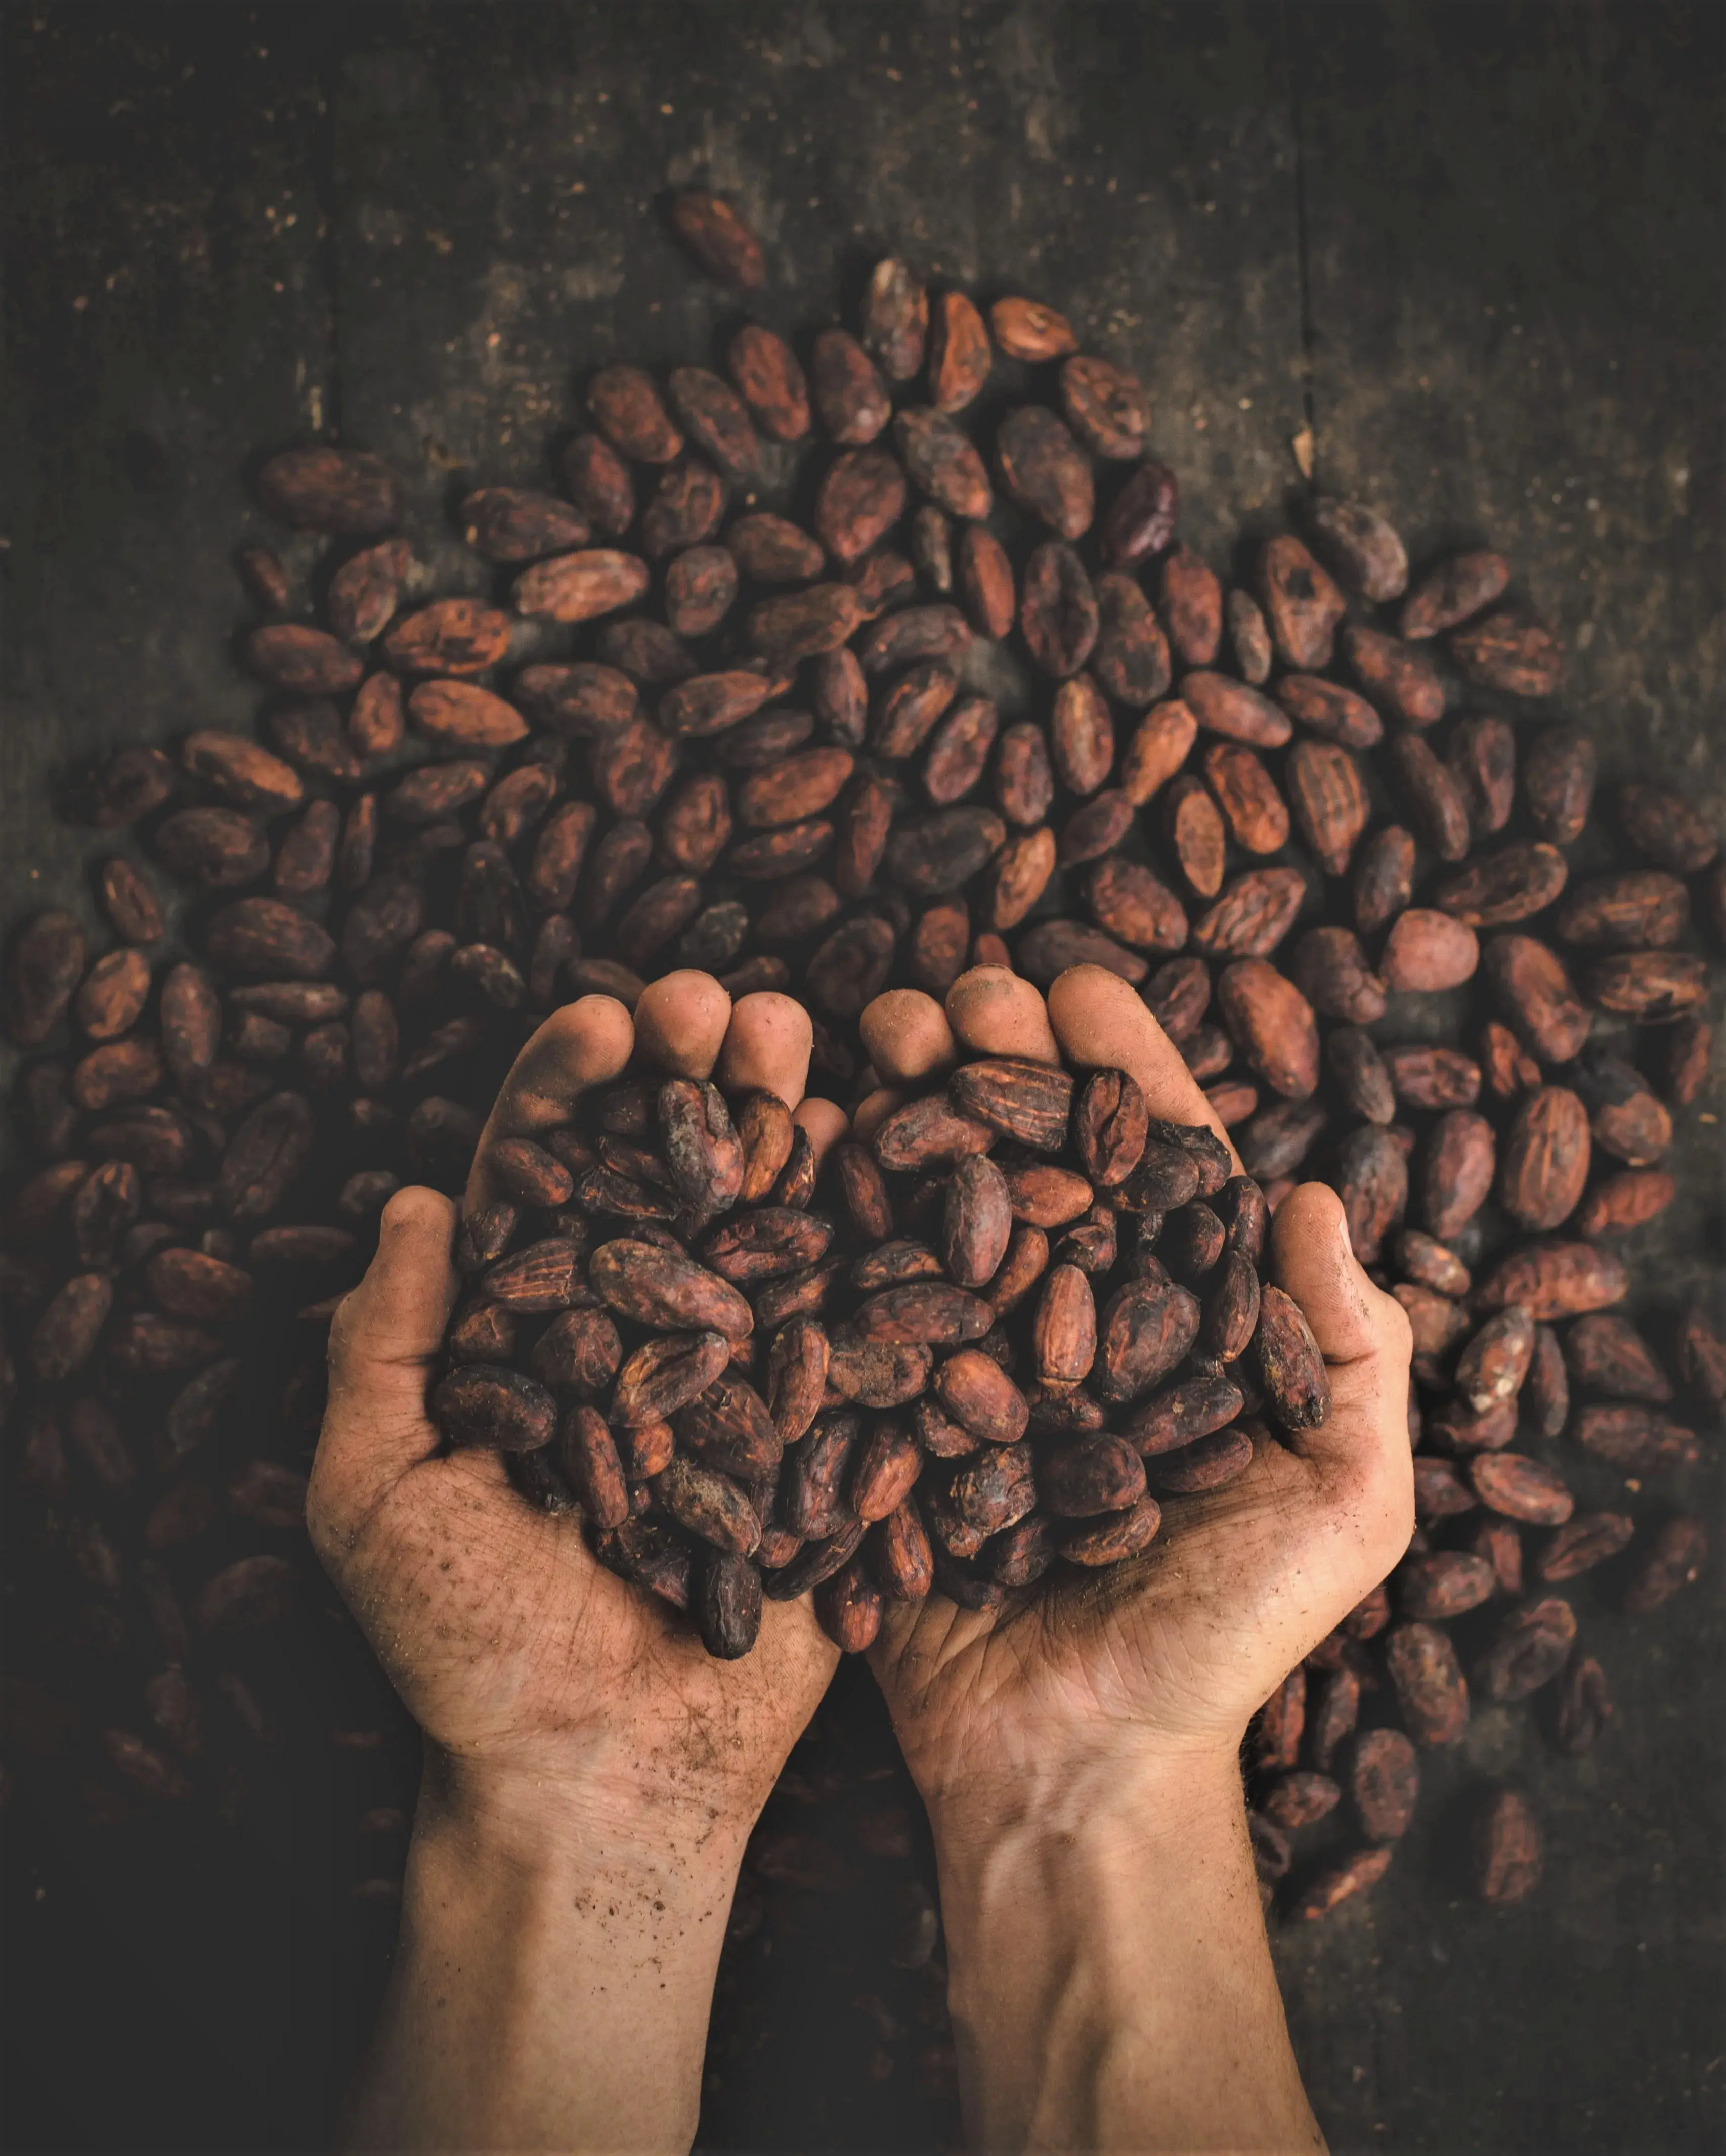 Cocoa farmers in West Africa and Latin America collaborate on sustainable agroforestry